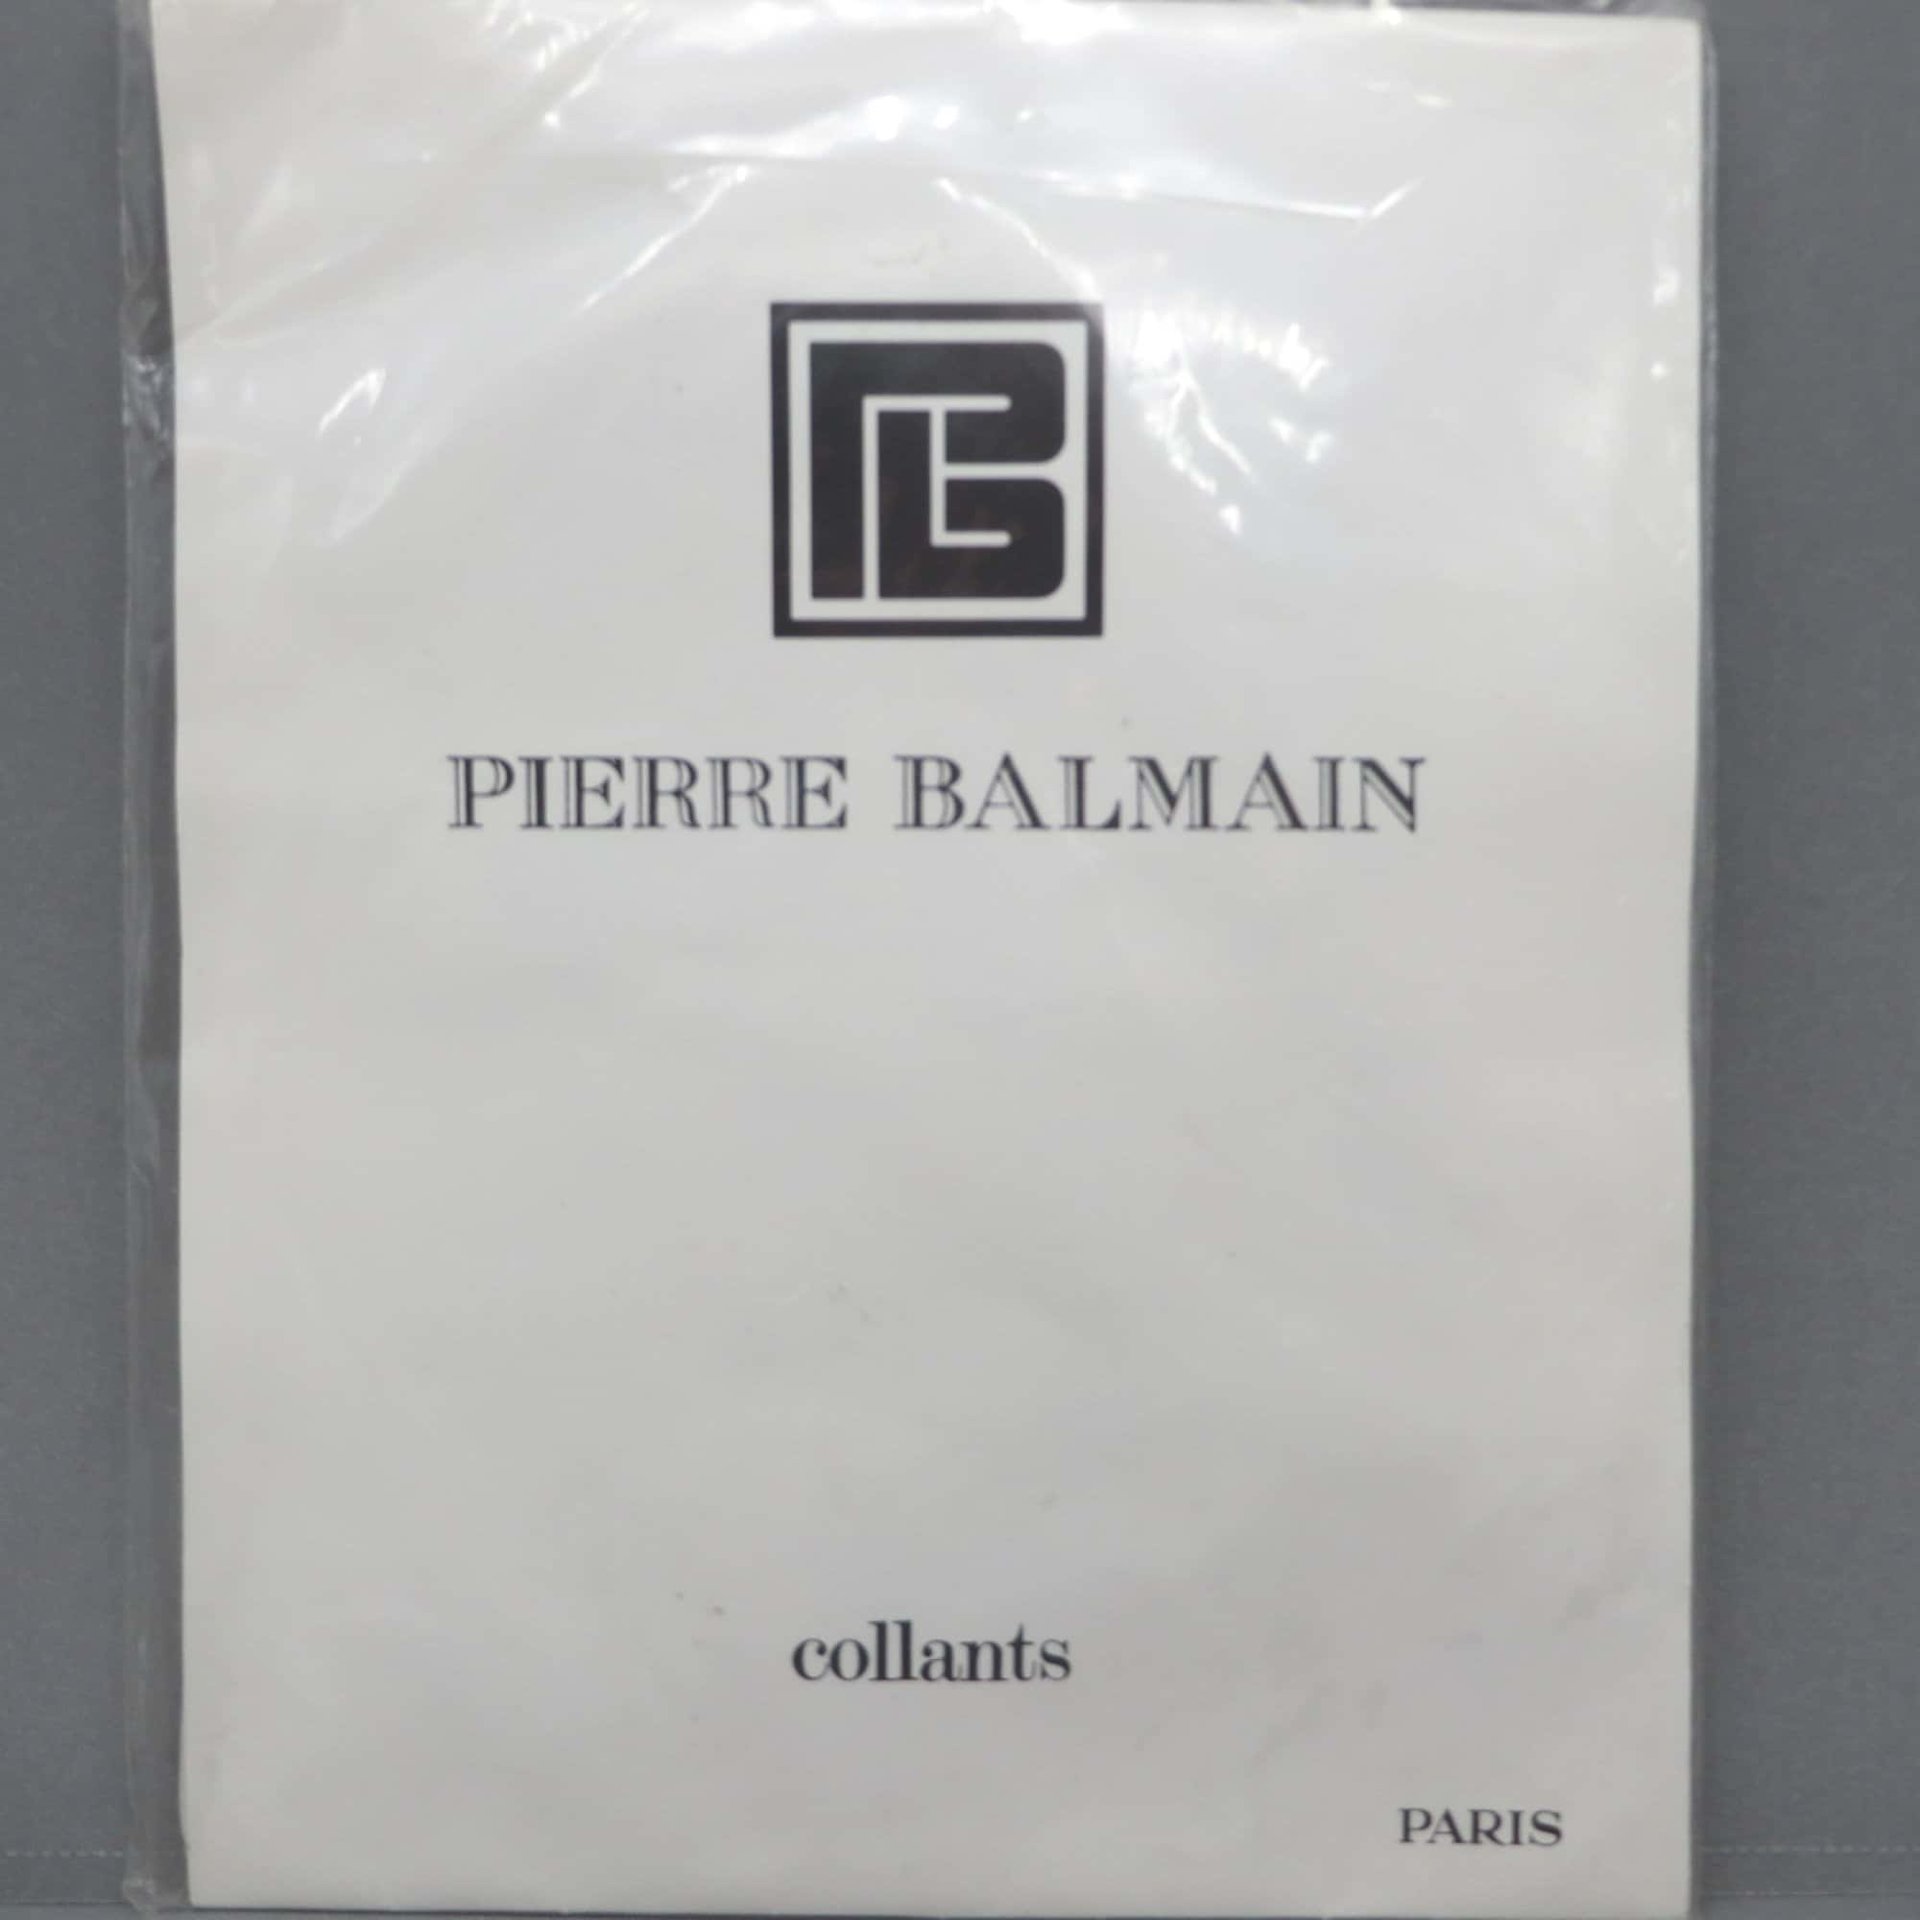 Pierre Balmain Stockings, Hold Ups Color Mink, Size Small 0/1